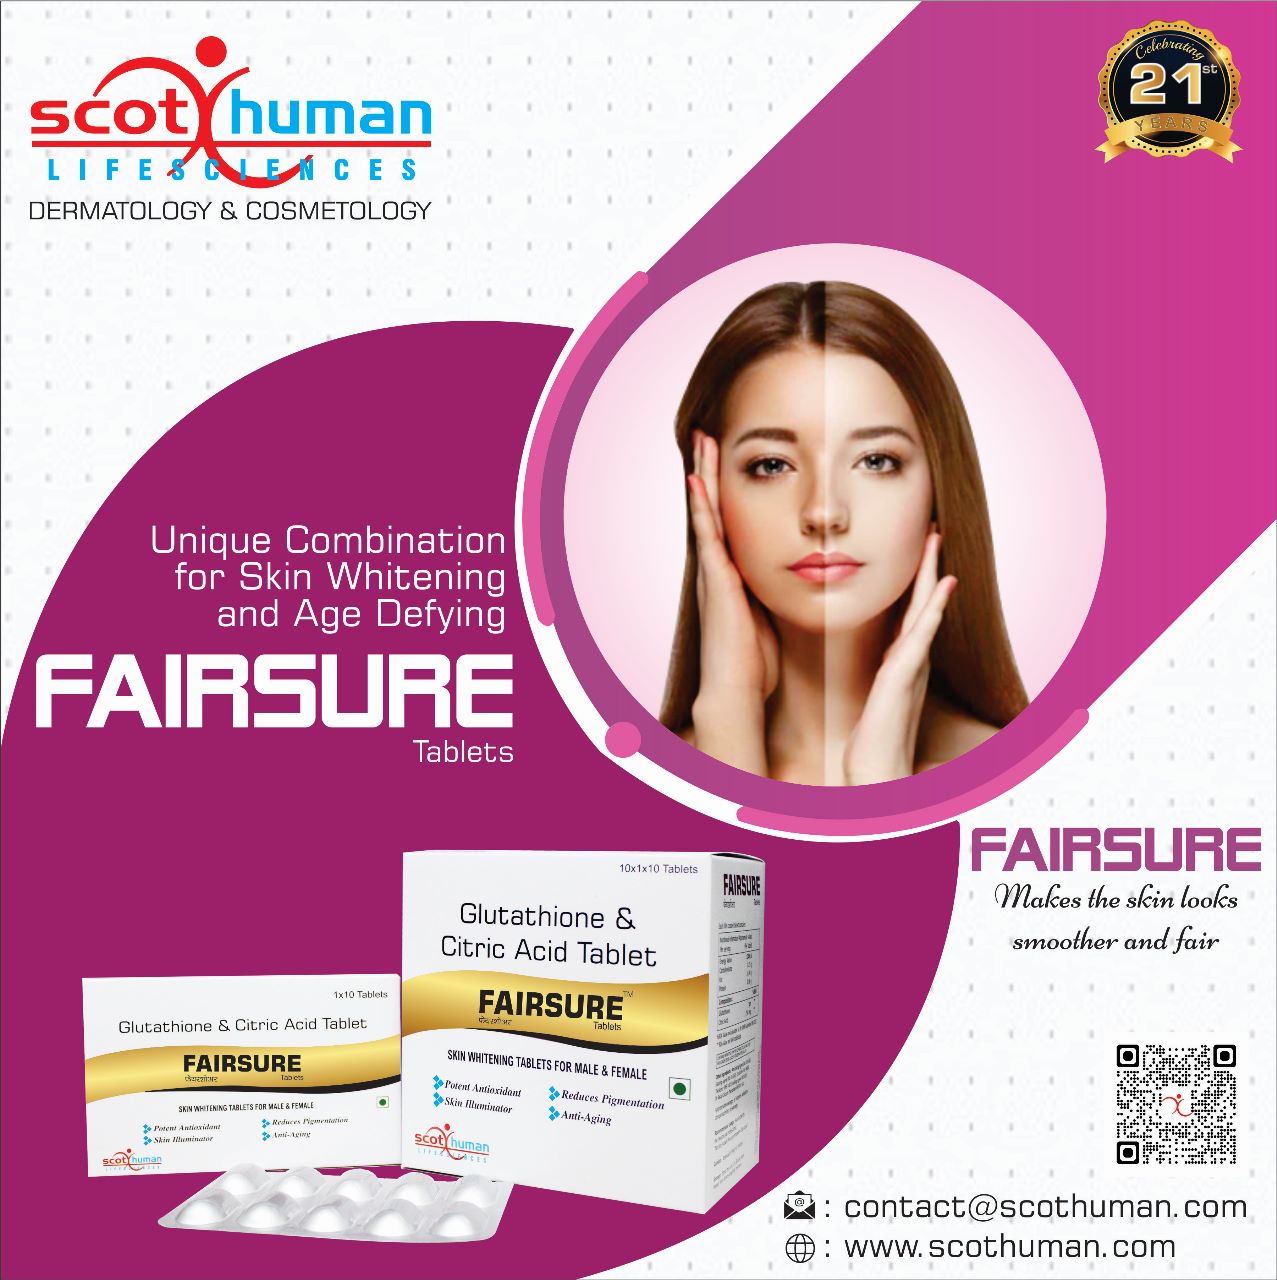 Product Name: Fairsure, Compositions of Fairsure are Glutathione and Citric Acid Tablets - Pharma Drugs and Chemicals